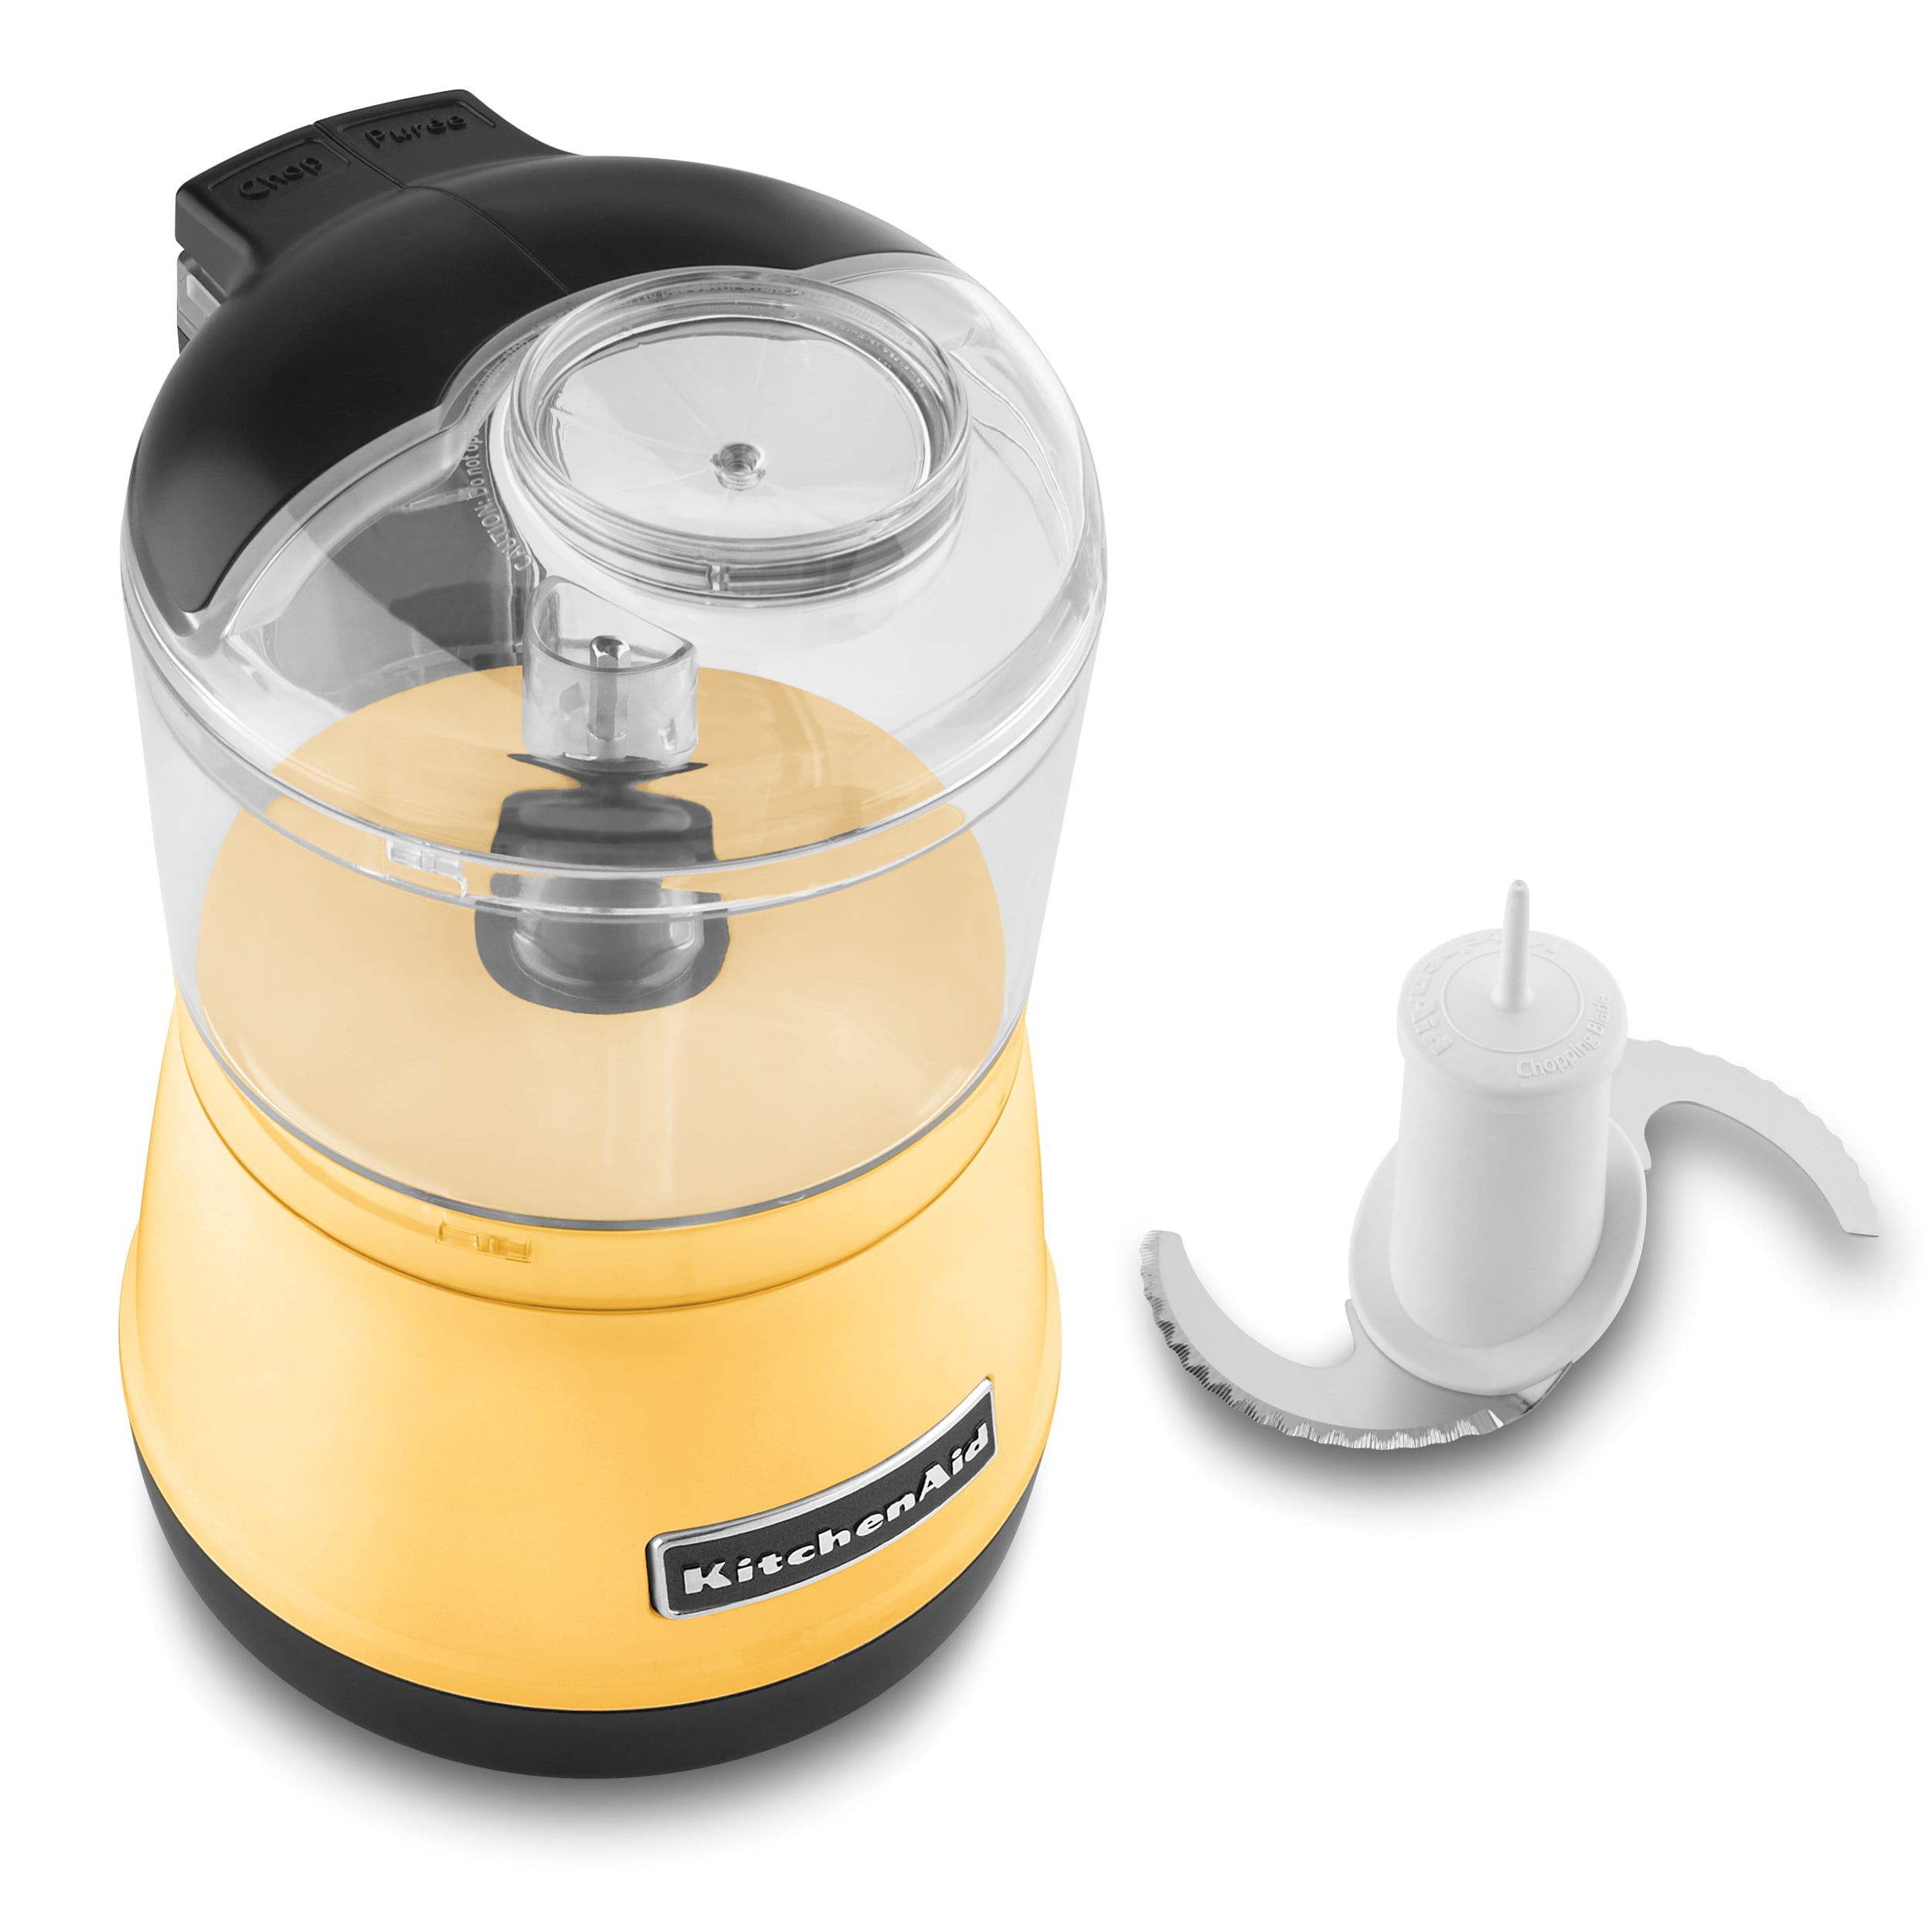 Majestic Yellow Cuisinart Electric Tall Can Opener , Majestic Kitchen Aid ,  Majestic Yellow Kitchenaid 